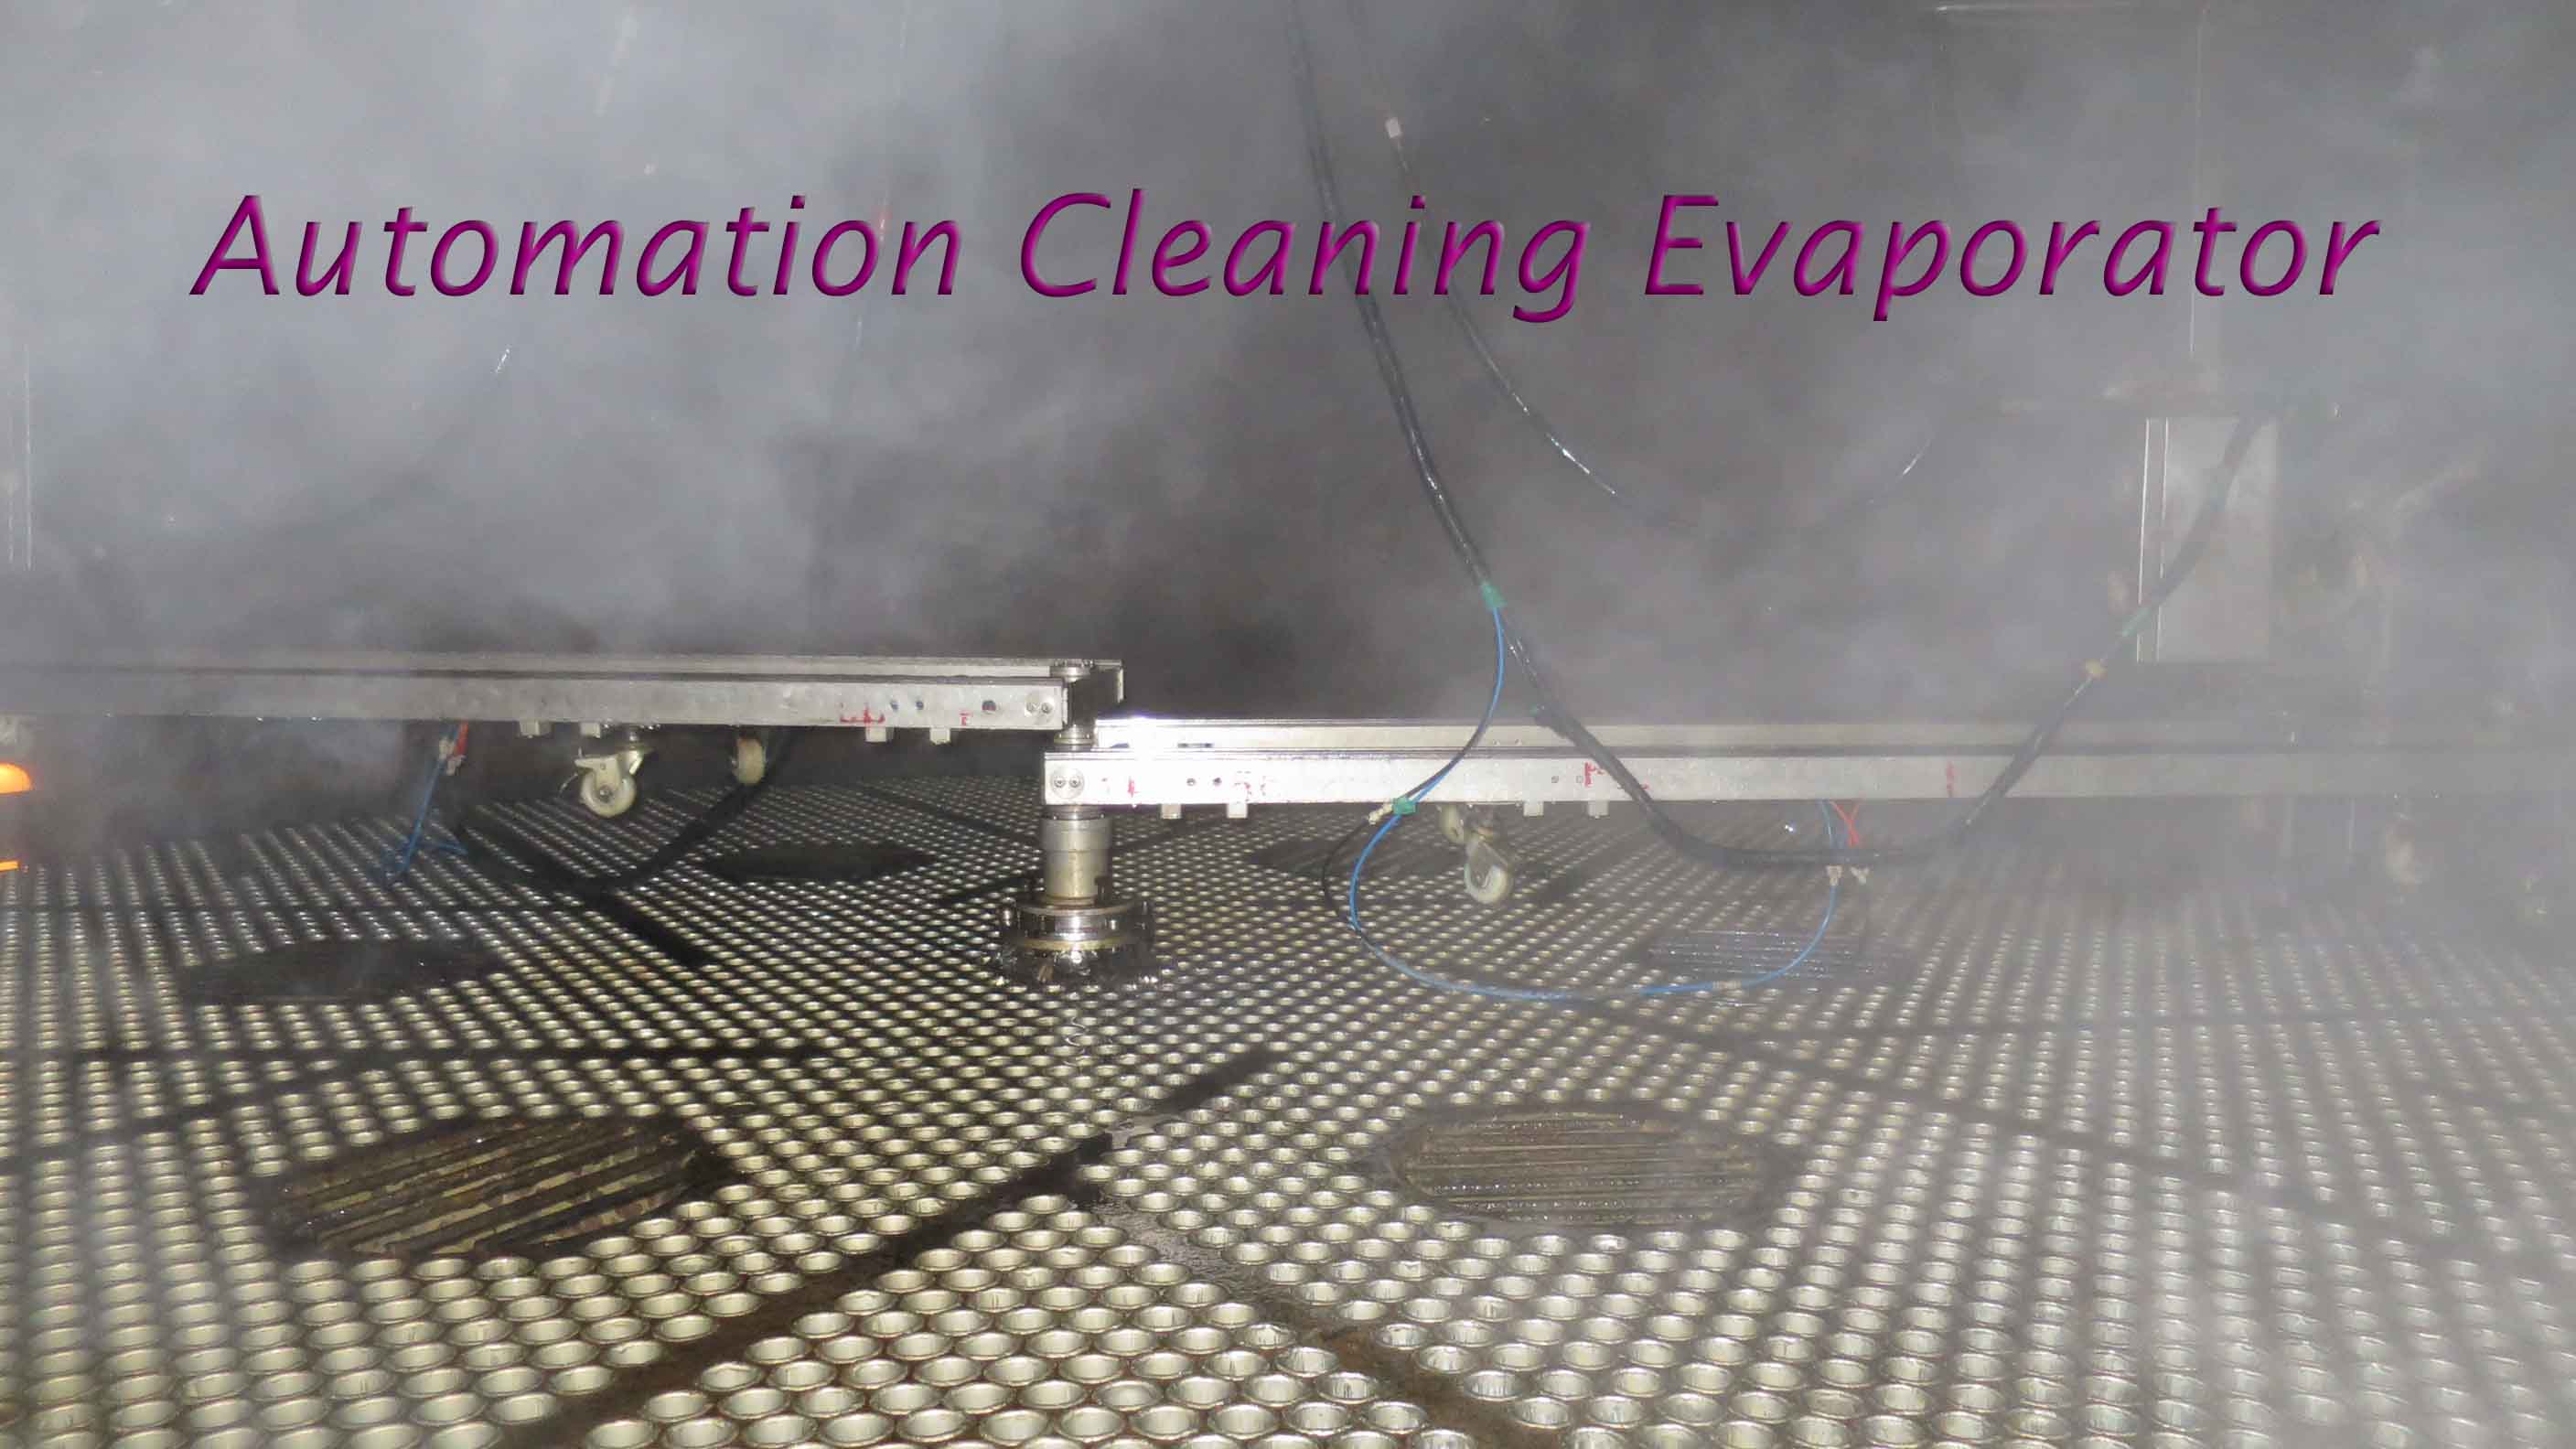 Automation Cleaning Evaporator 